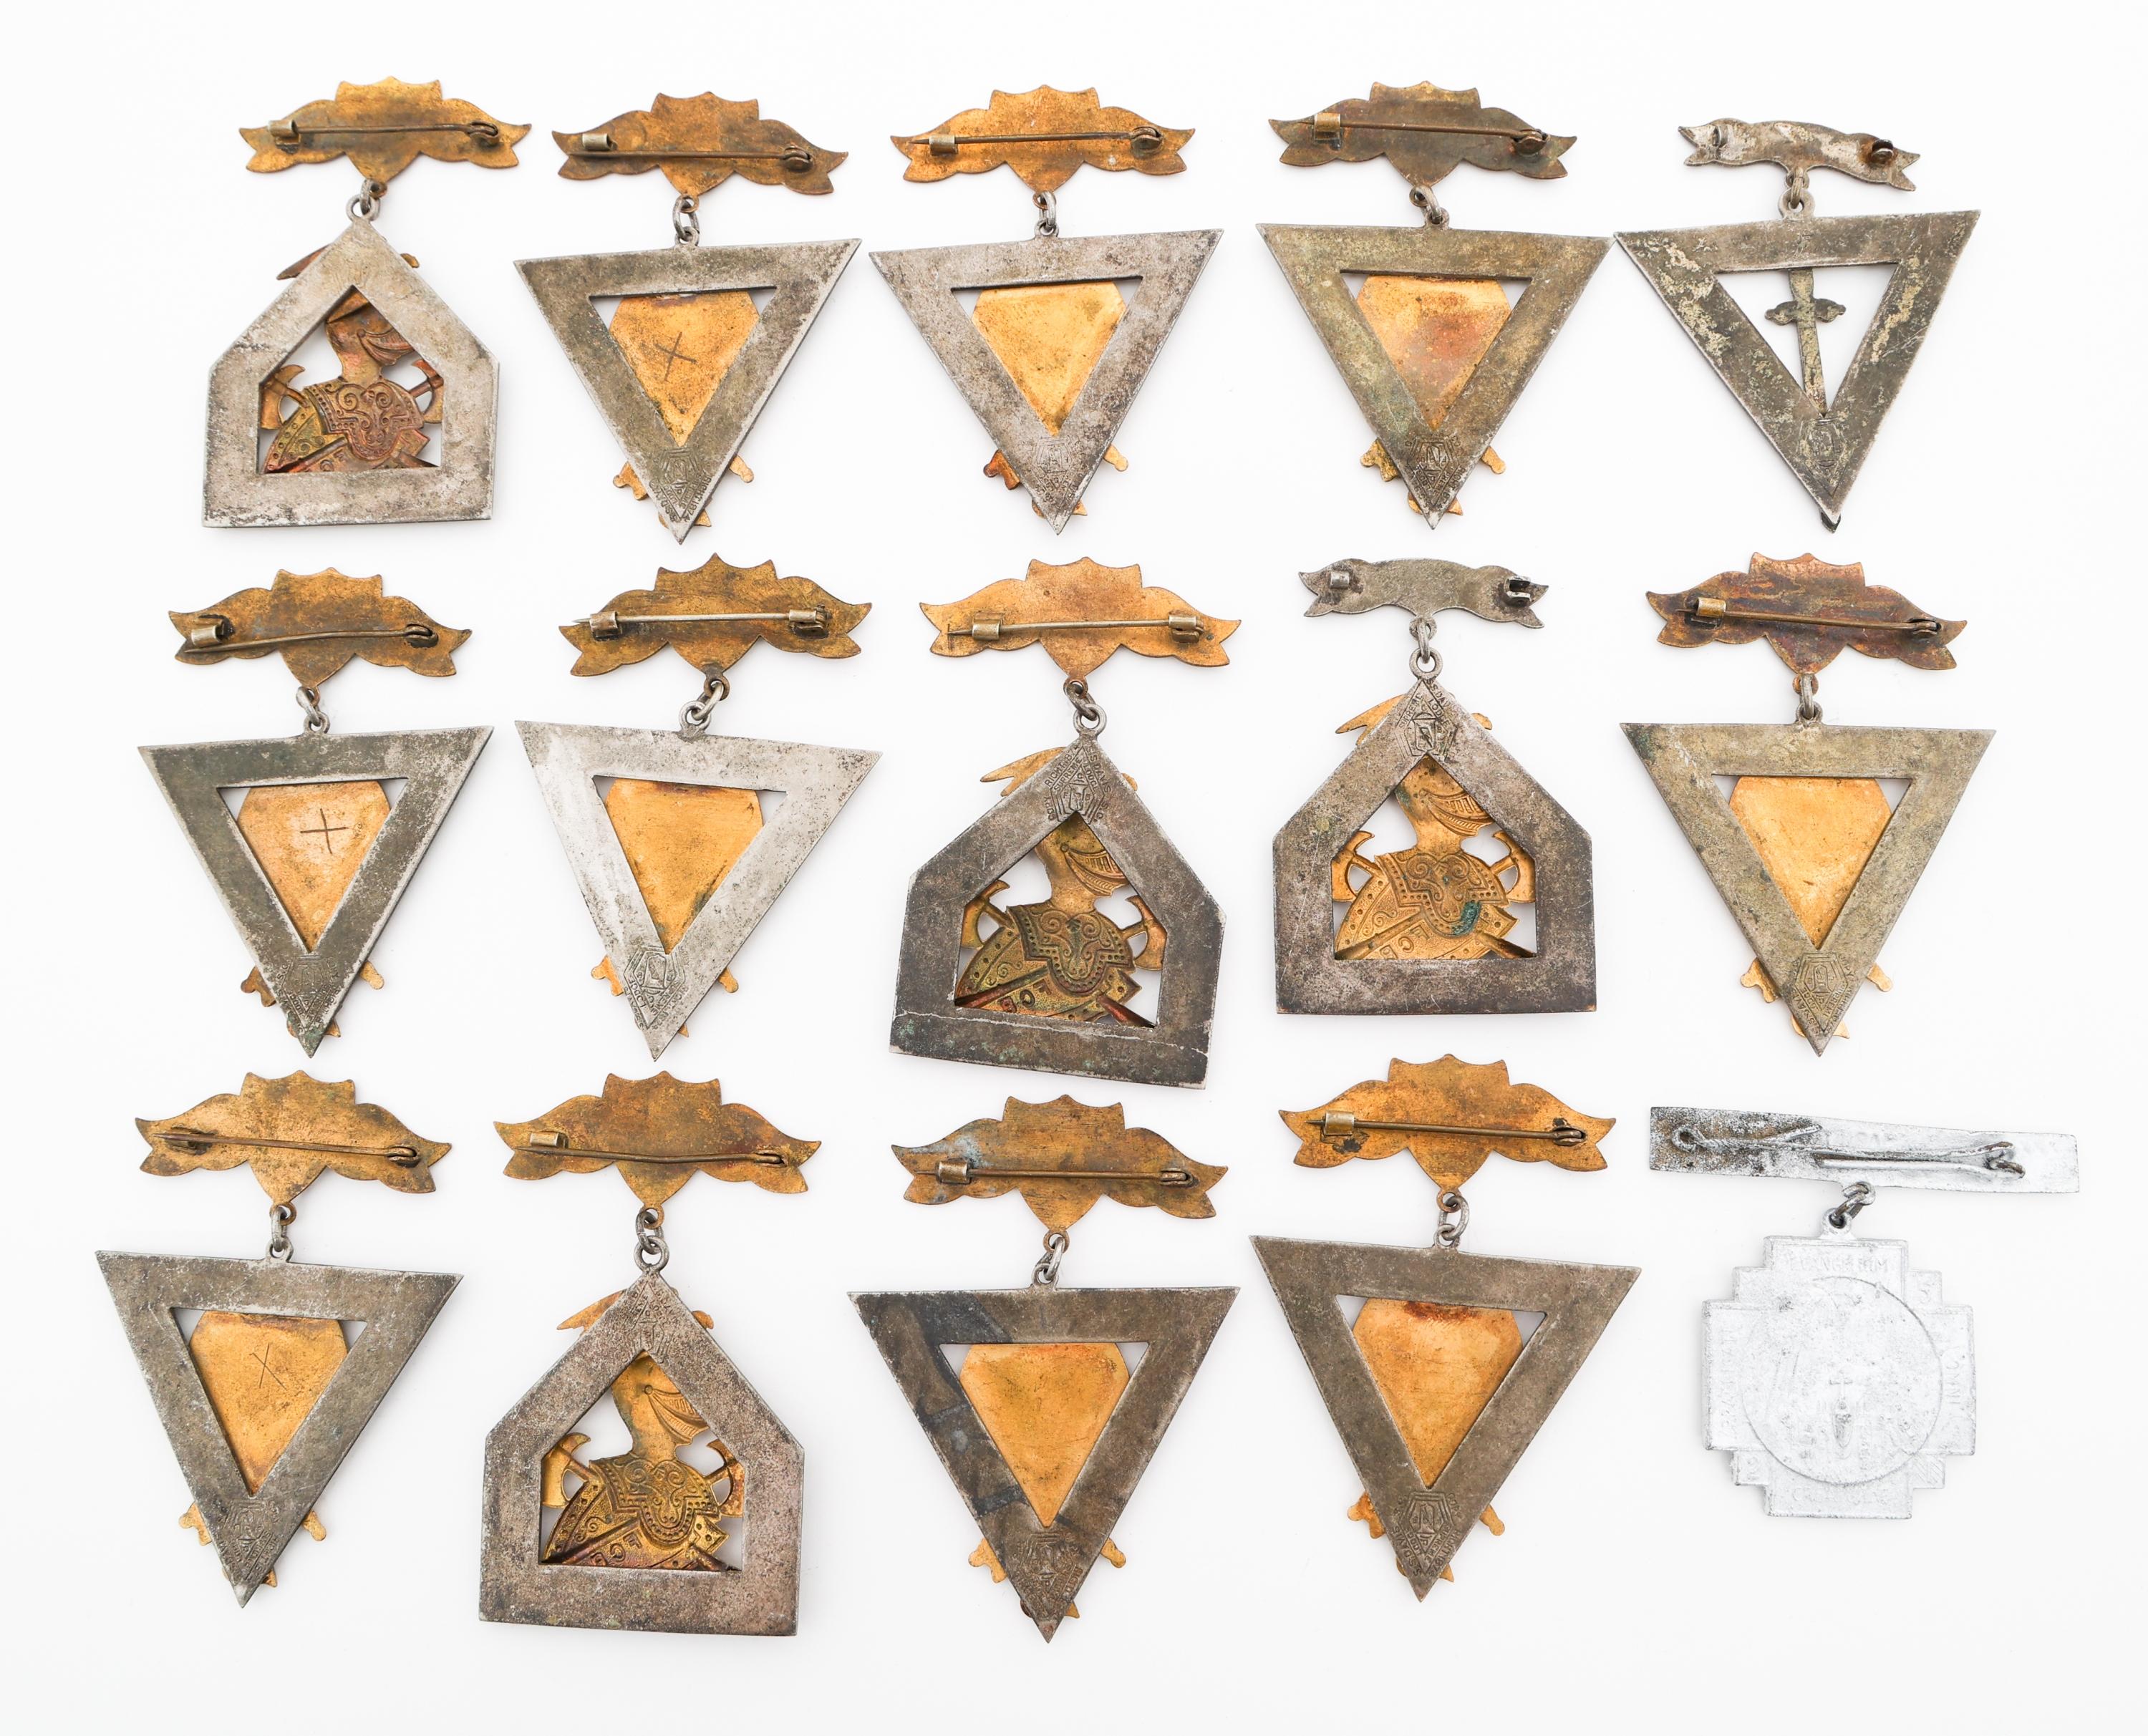 19th C. KNIGHTS OF PYTHIAS & FRATERNAL BADGES